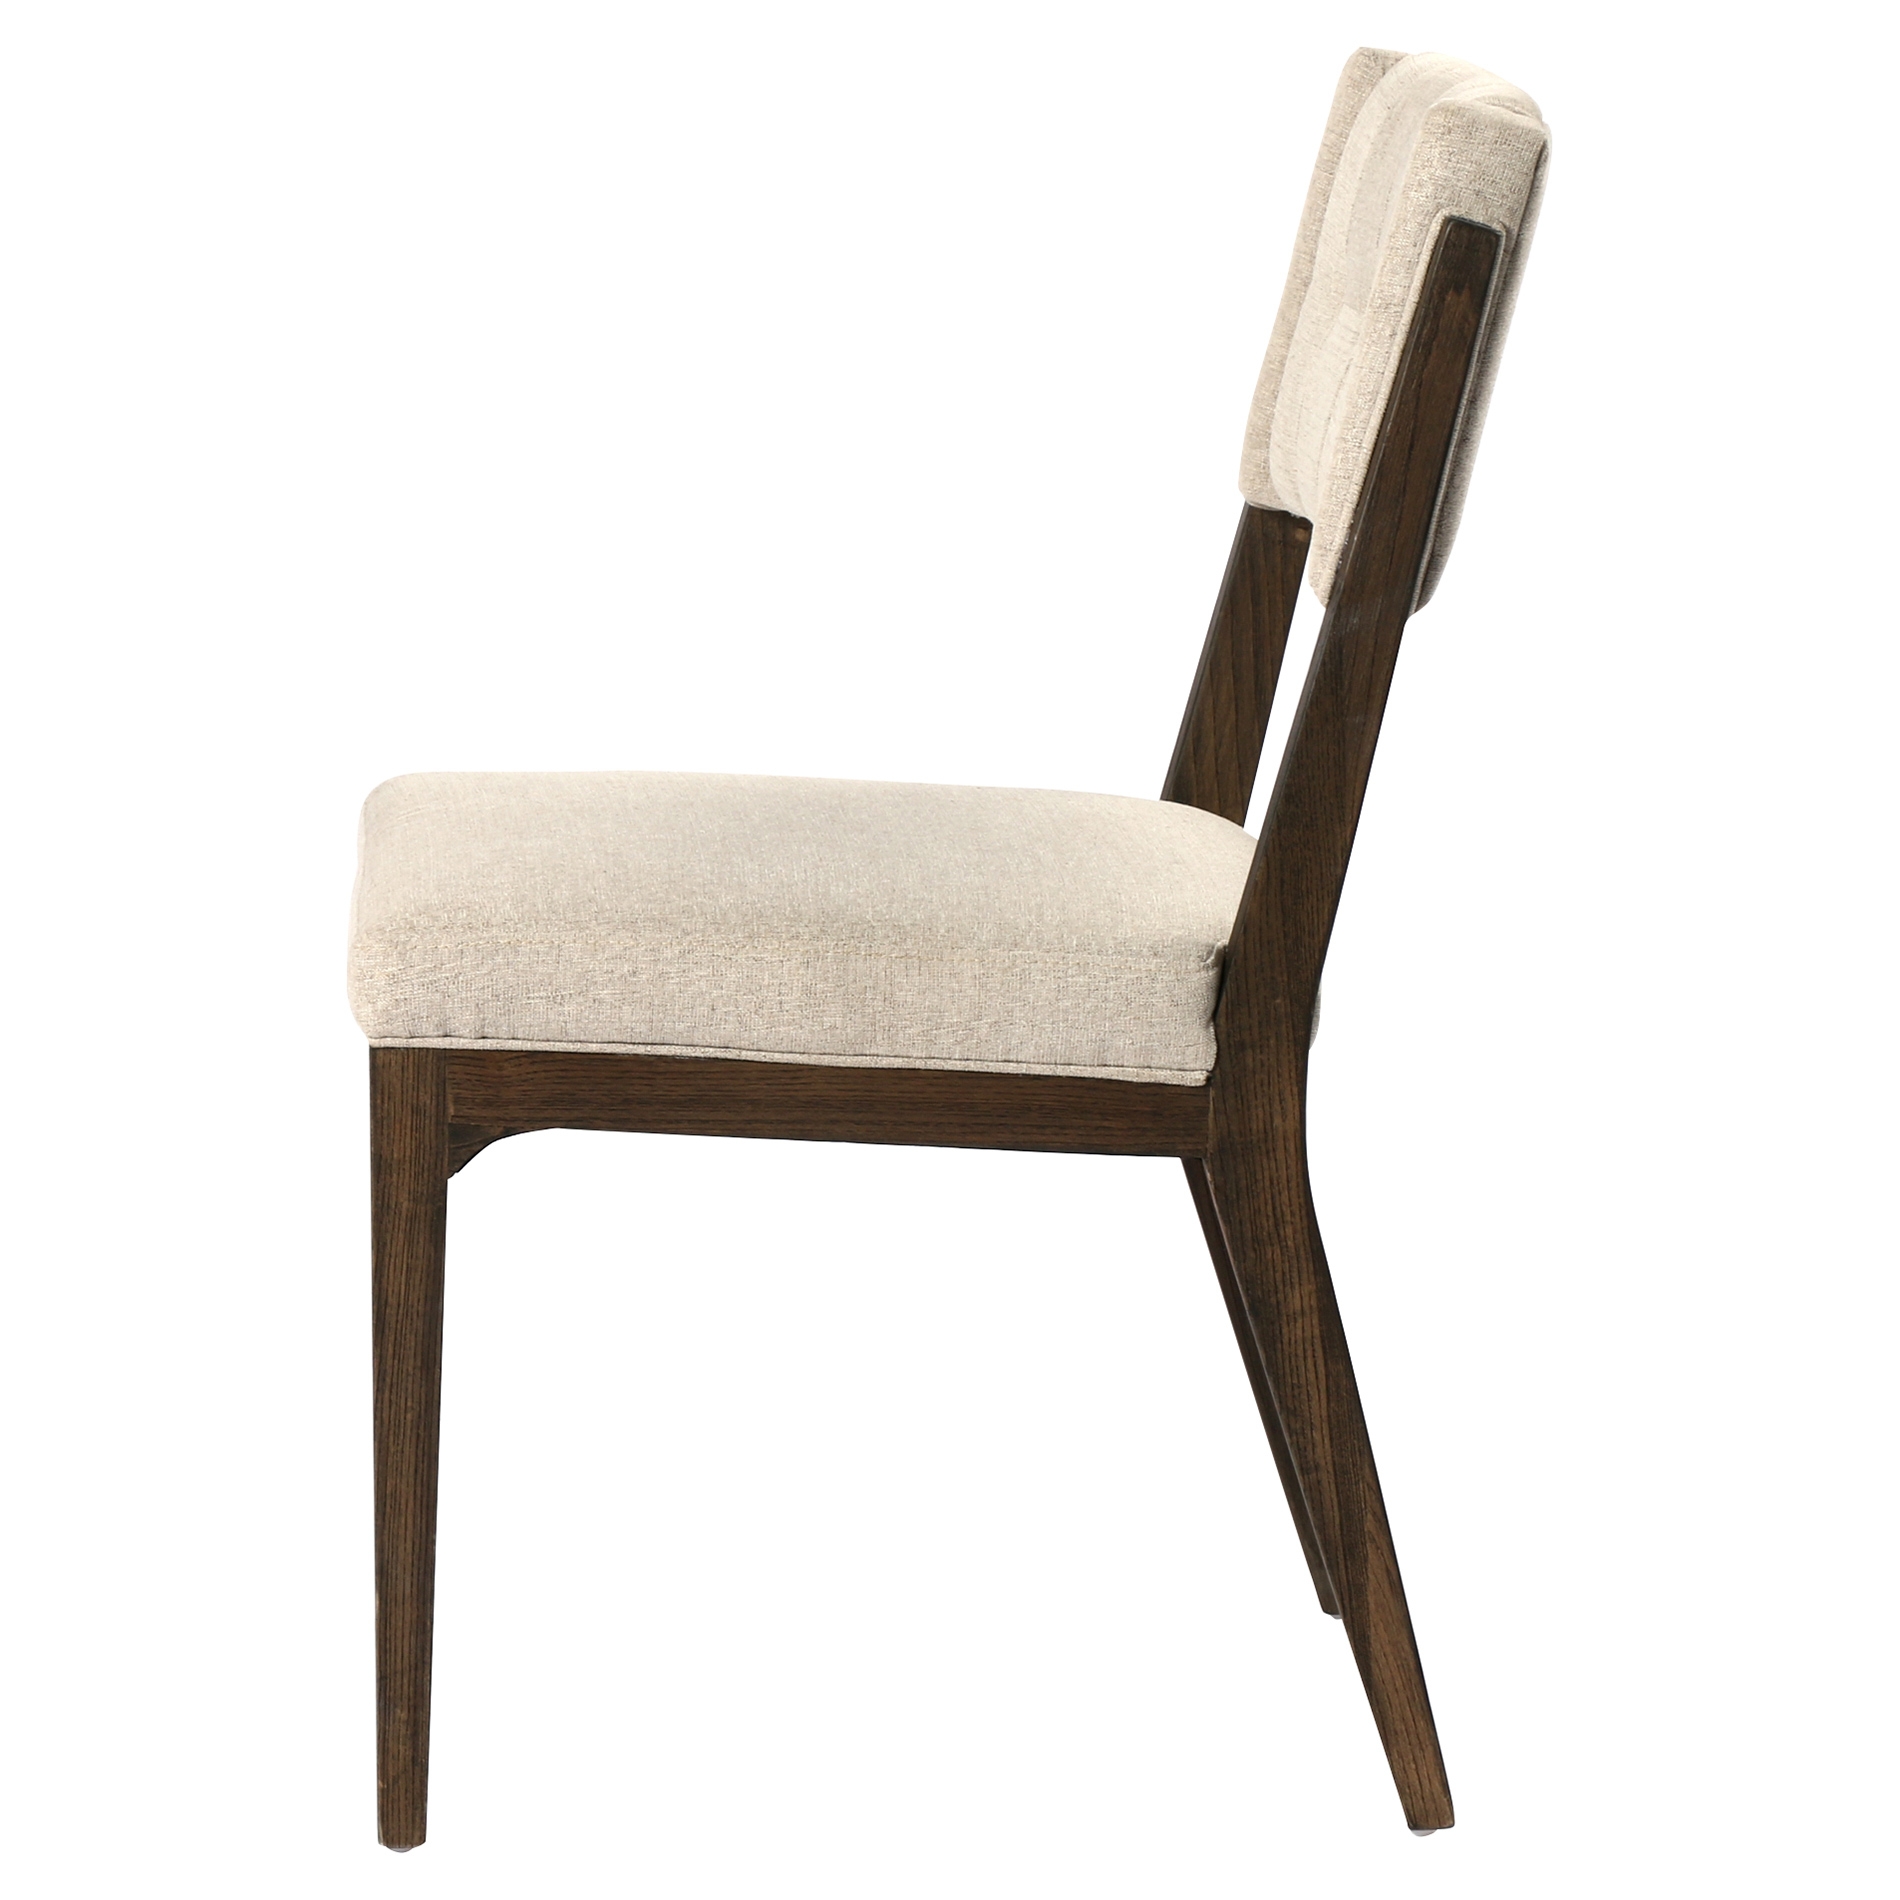 Arlene French Country Tuffed Beige Linen Upholstered Wood Dining Chair - Image 2